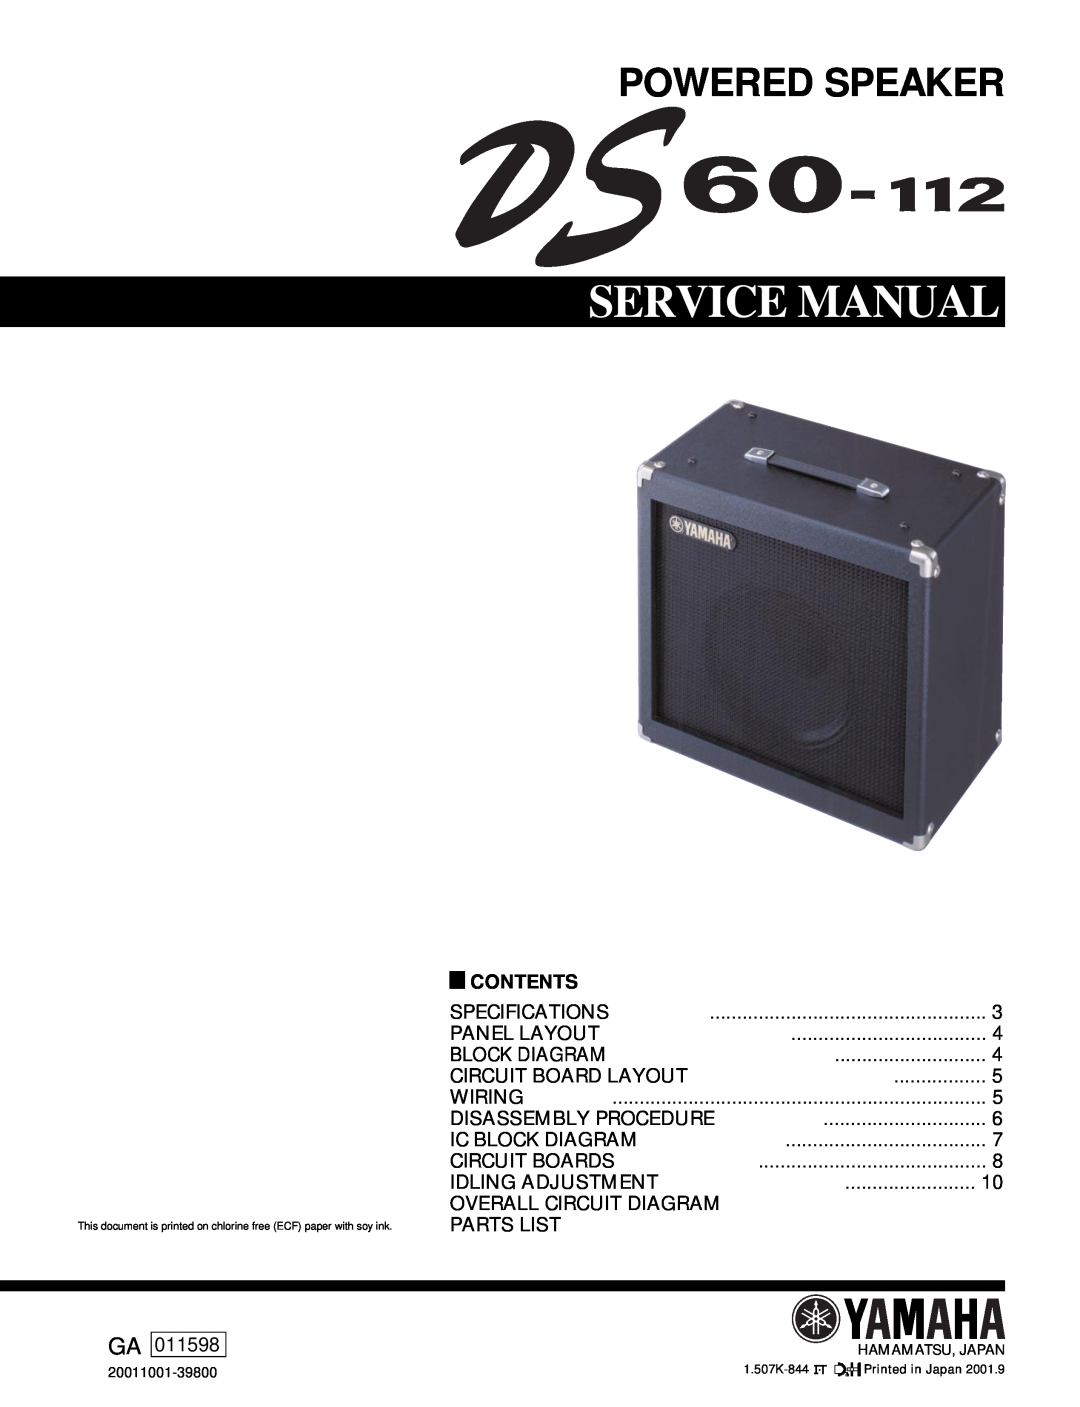 Yamaha DS60-112 service manual Powered Speaker, Contents 